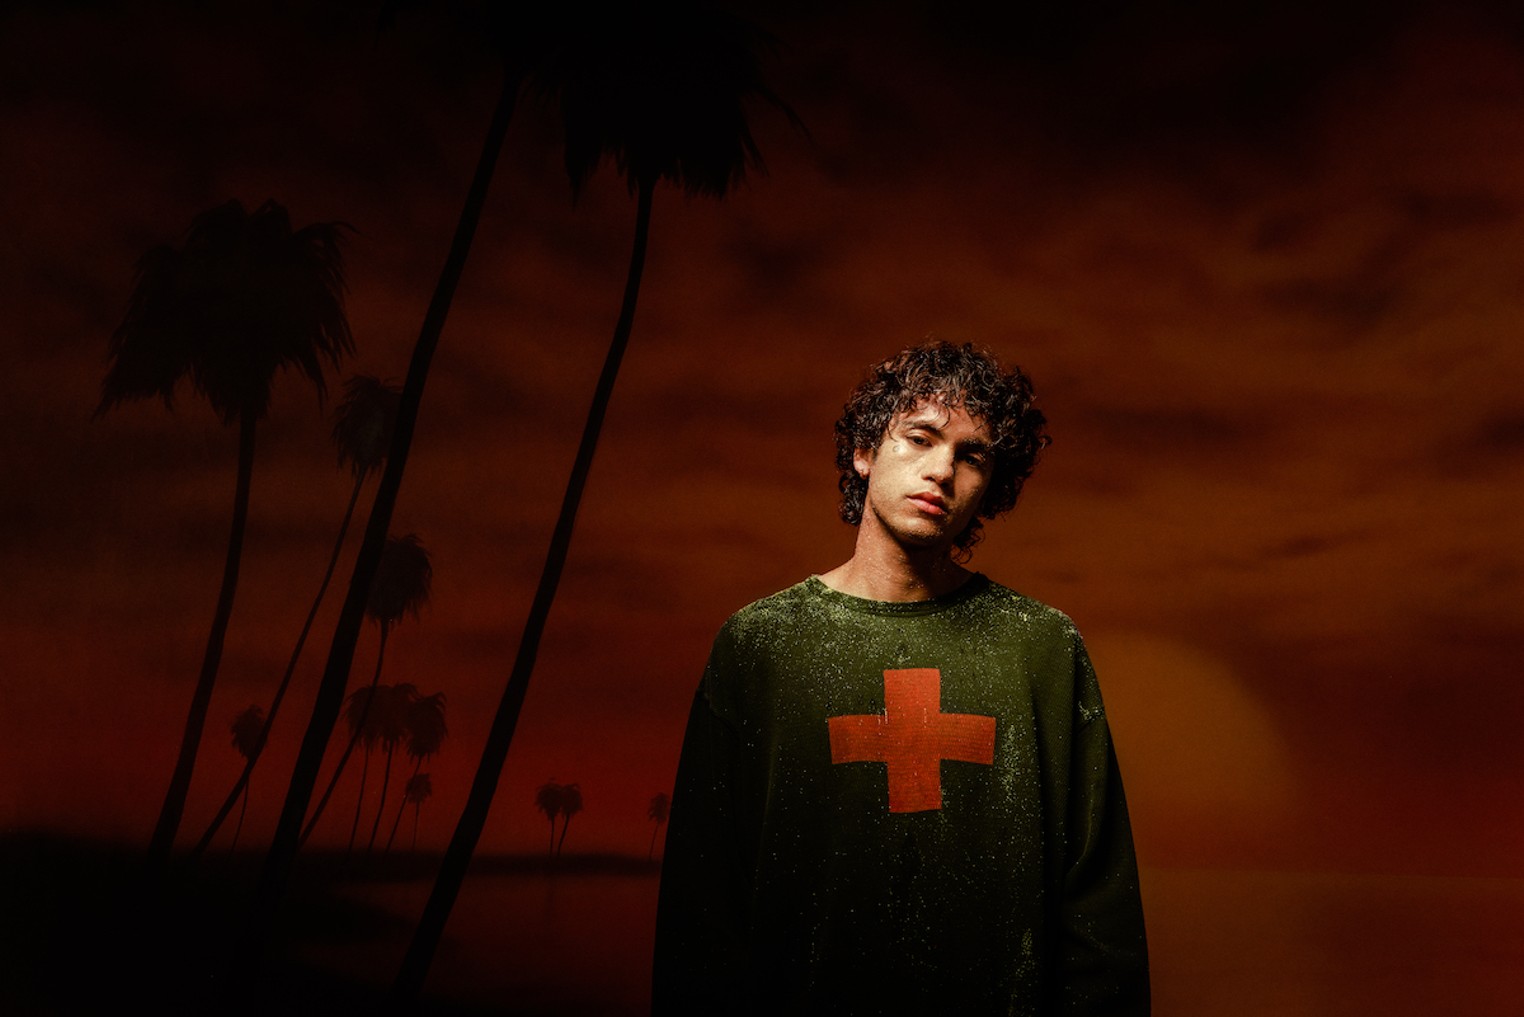 Interview with Dominic Fike on His New Album "Sunburn" and Touring